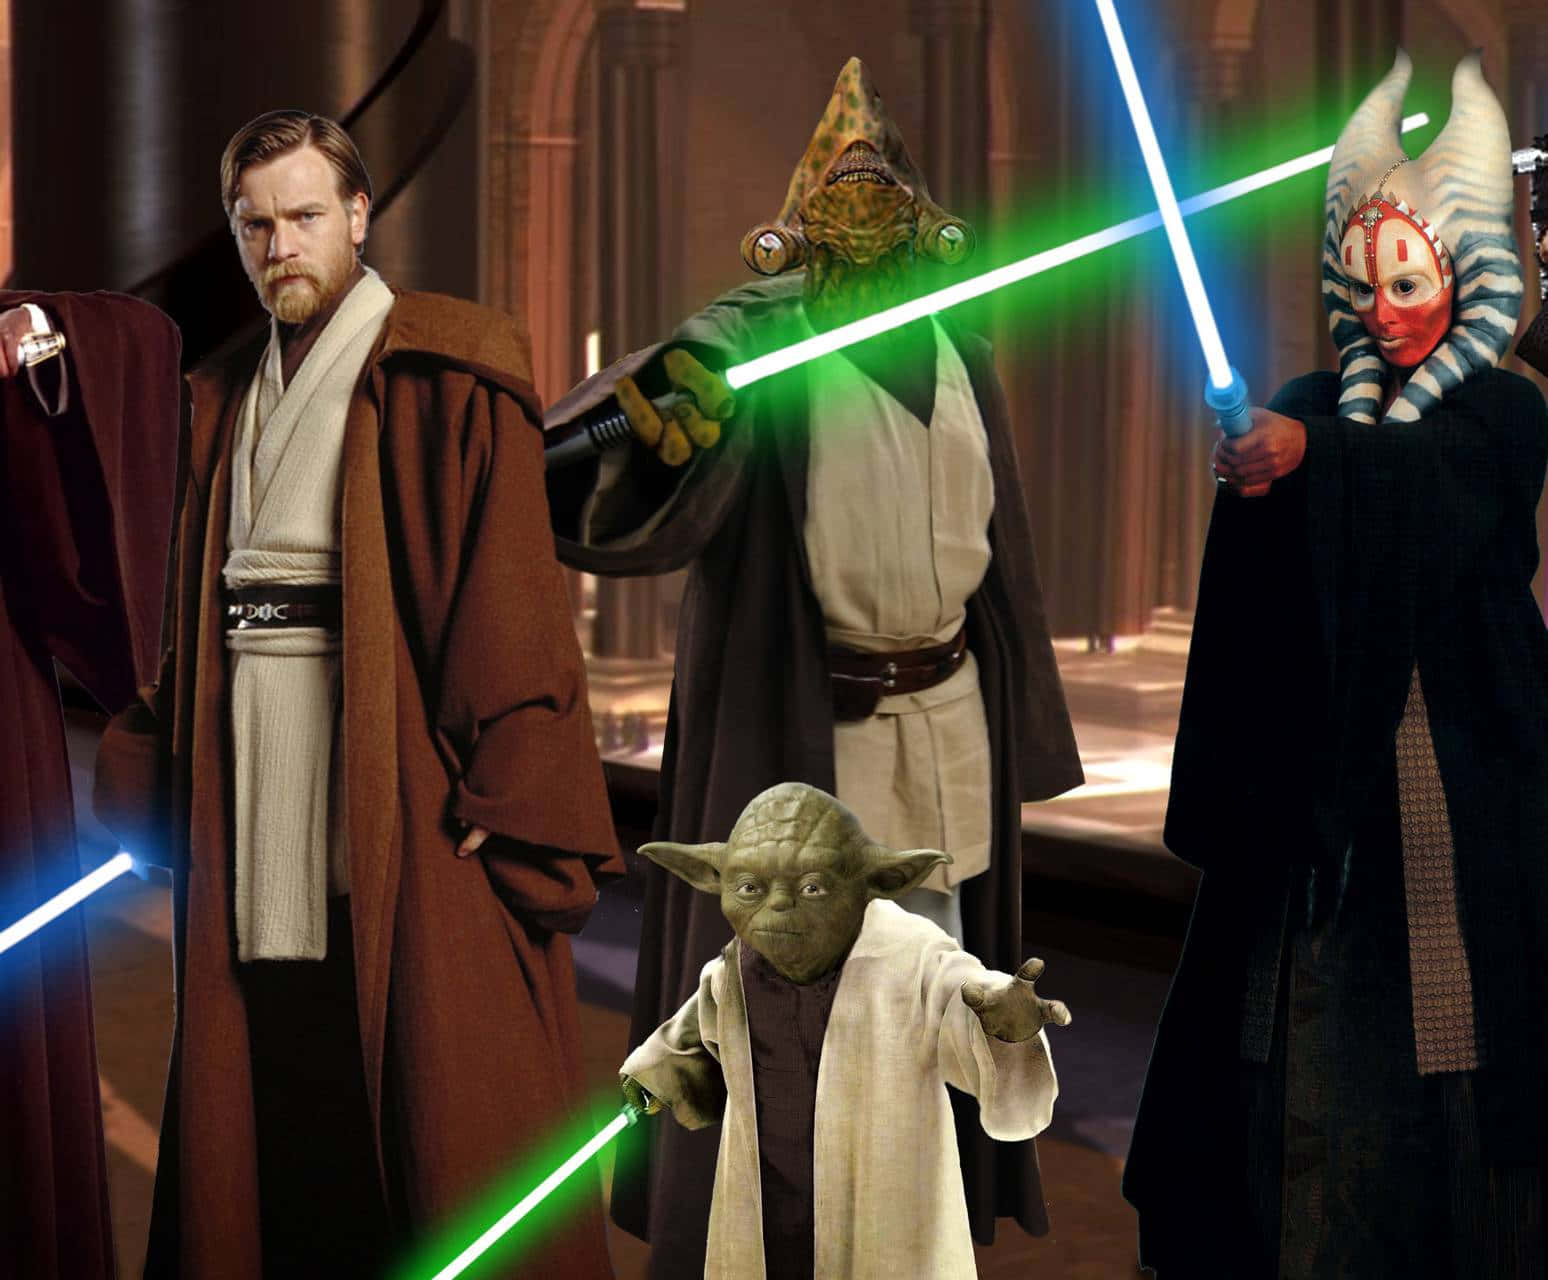 The Jedi Council convening in the council chamber Wallpaper